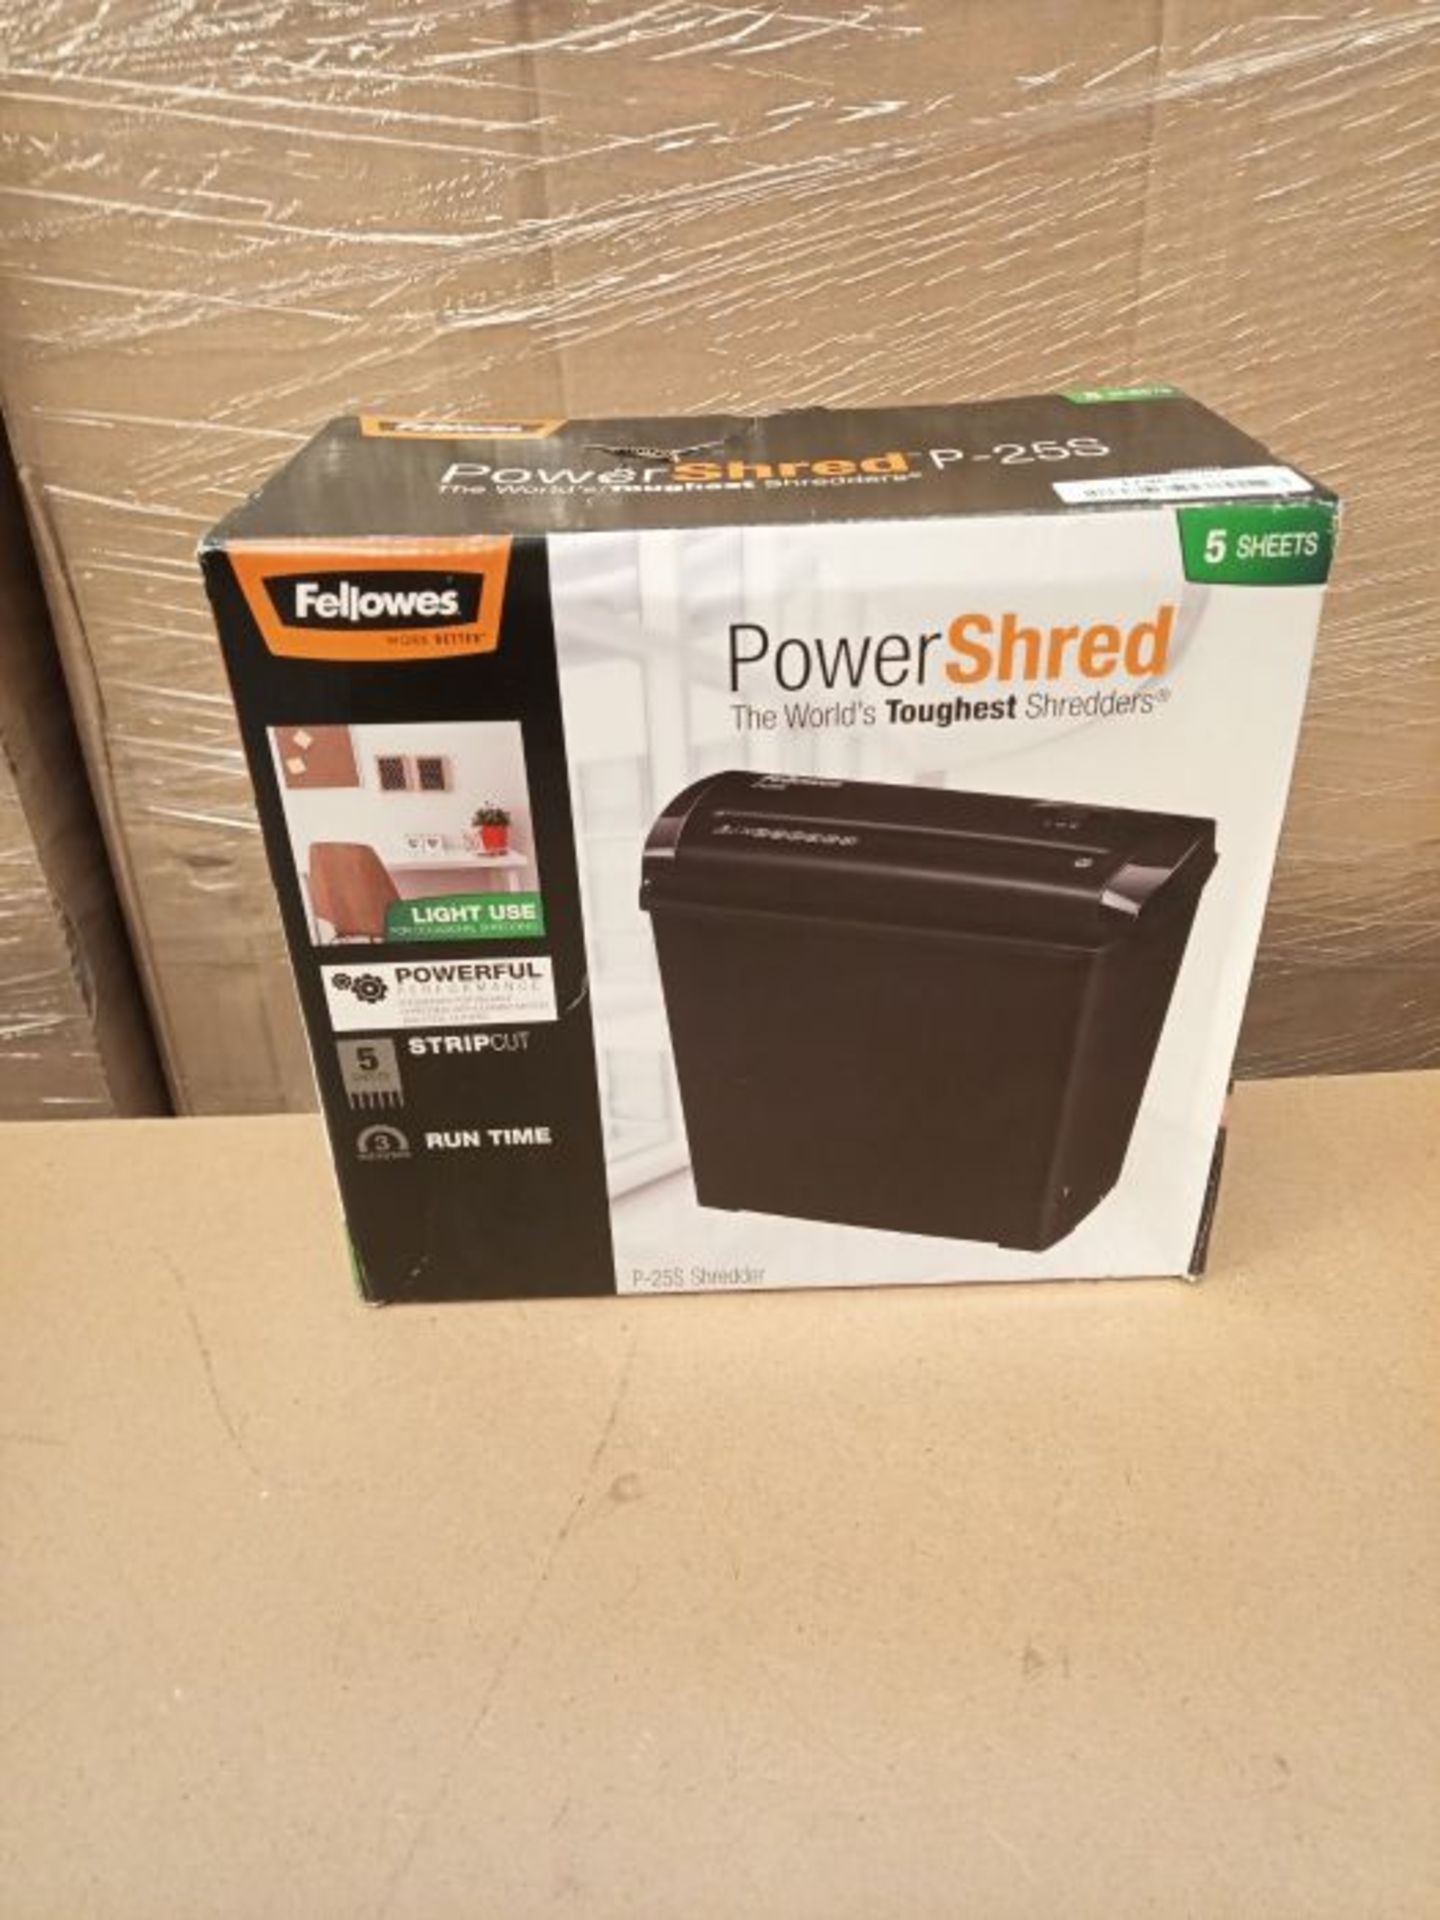 Fellowes P-25S Basic Security Strip Cut Personal Shredder, Shreds 5 A4 Sheets into an - Image 2 of 3